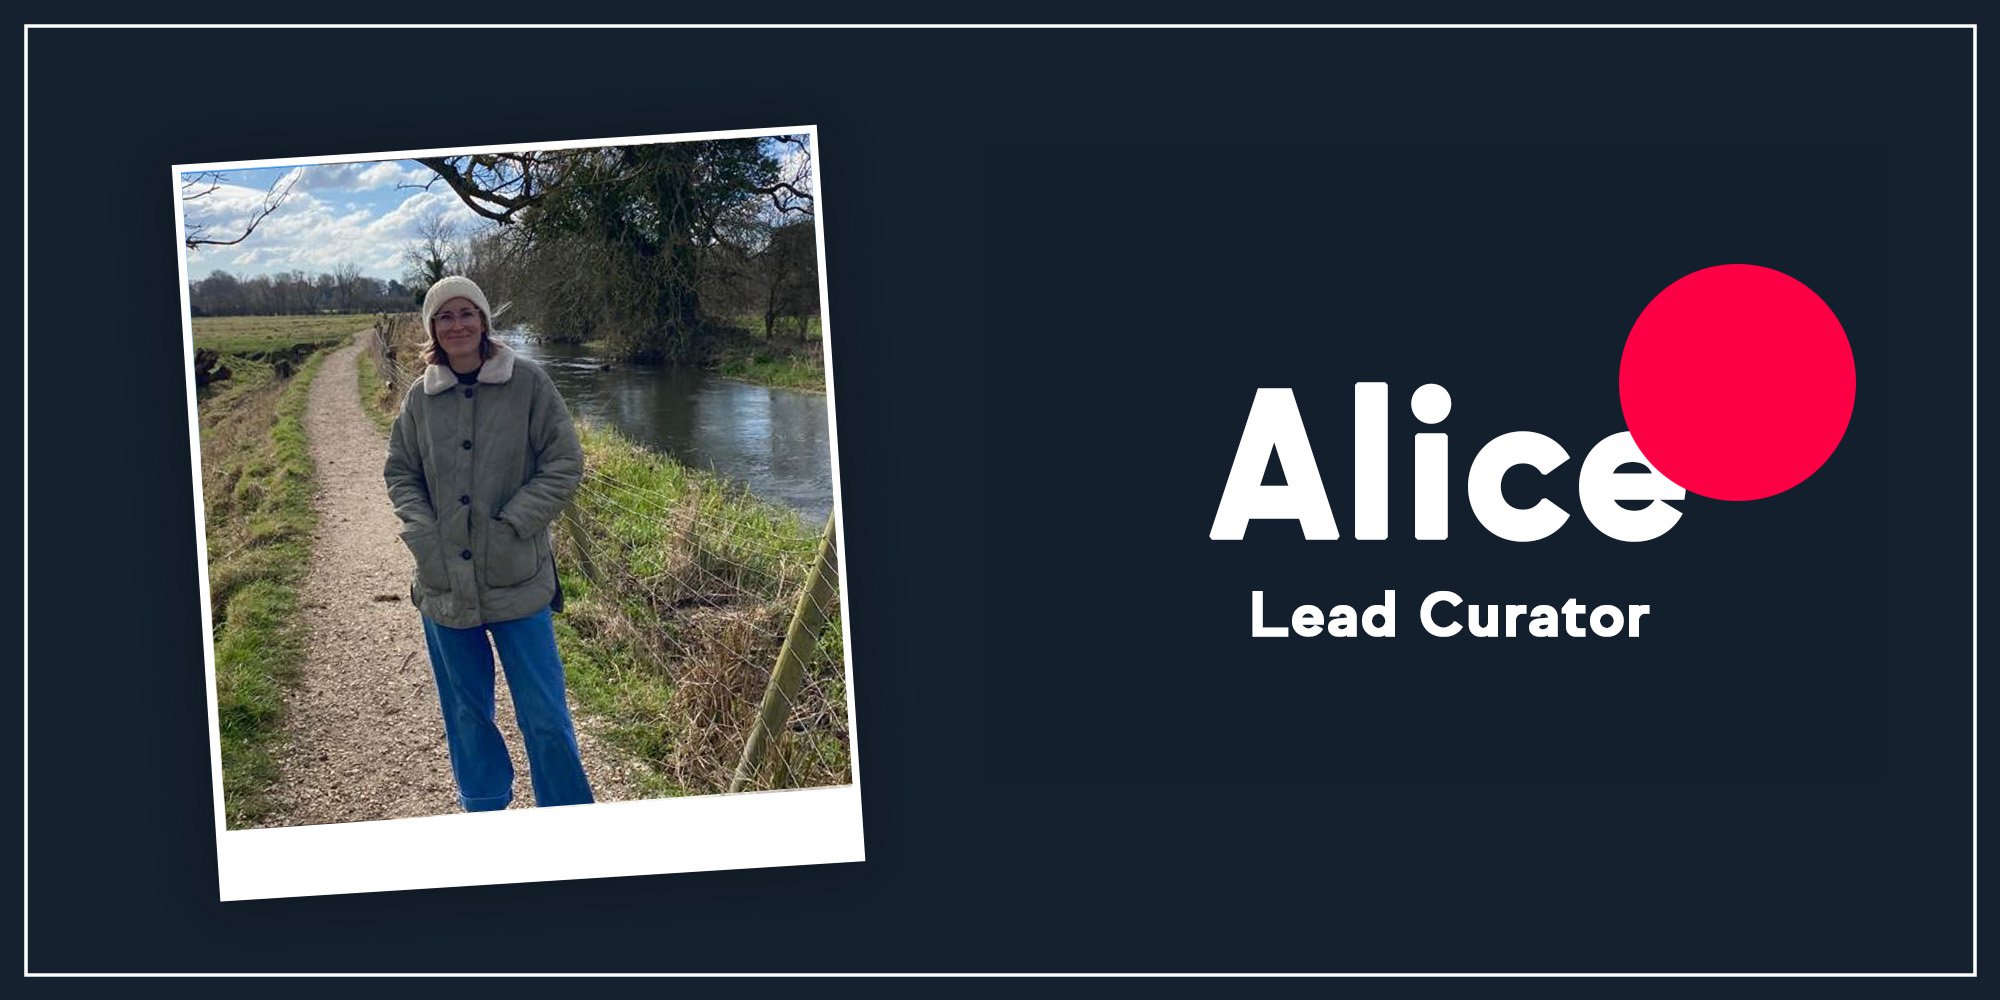 Get to know: Alice